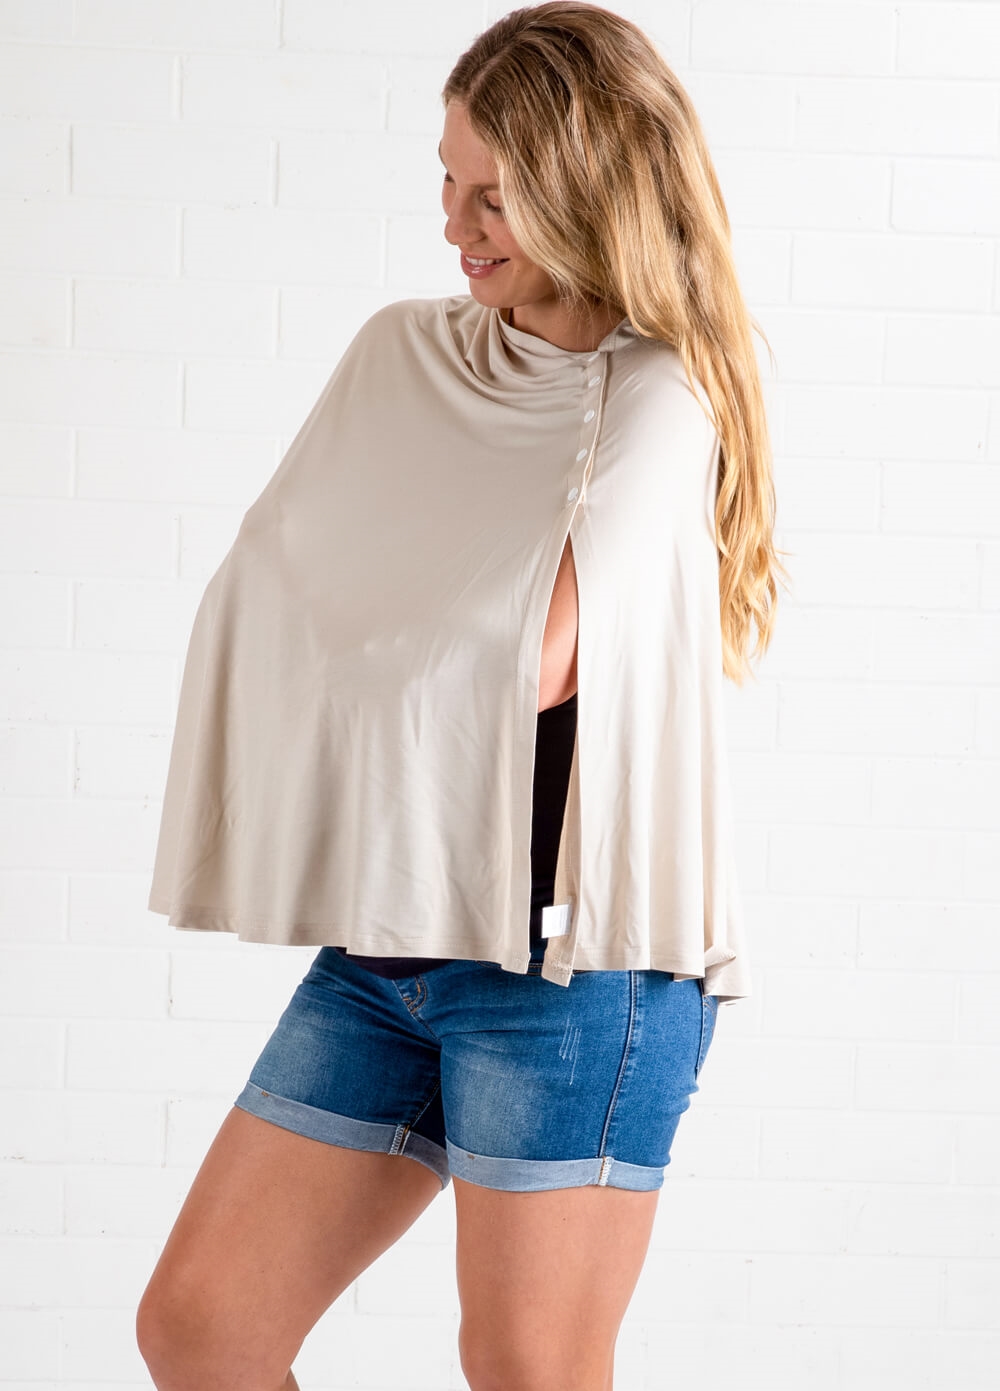 Lait & Co - Memoire Nursing Cover Shawl in Ivory | Queen Bee